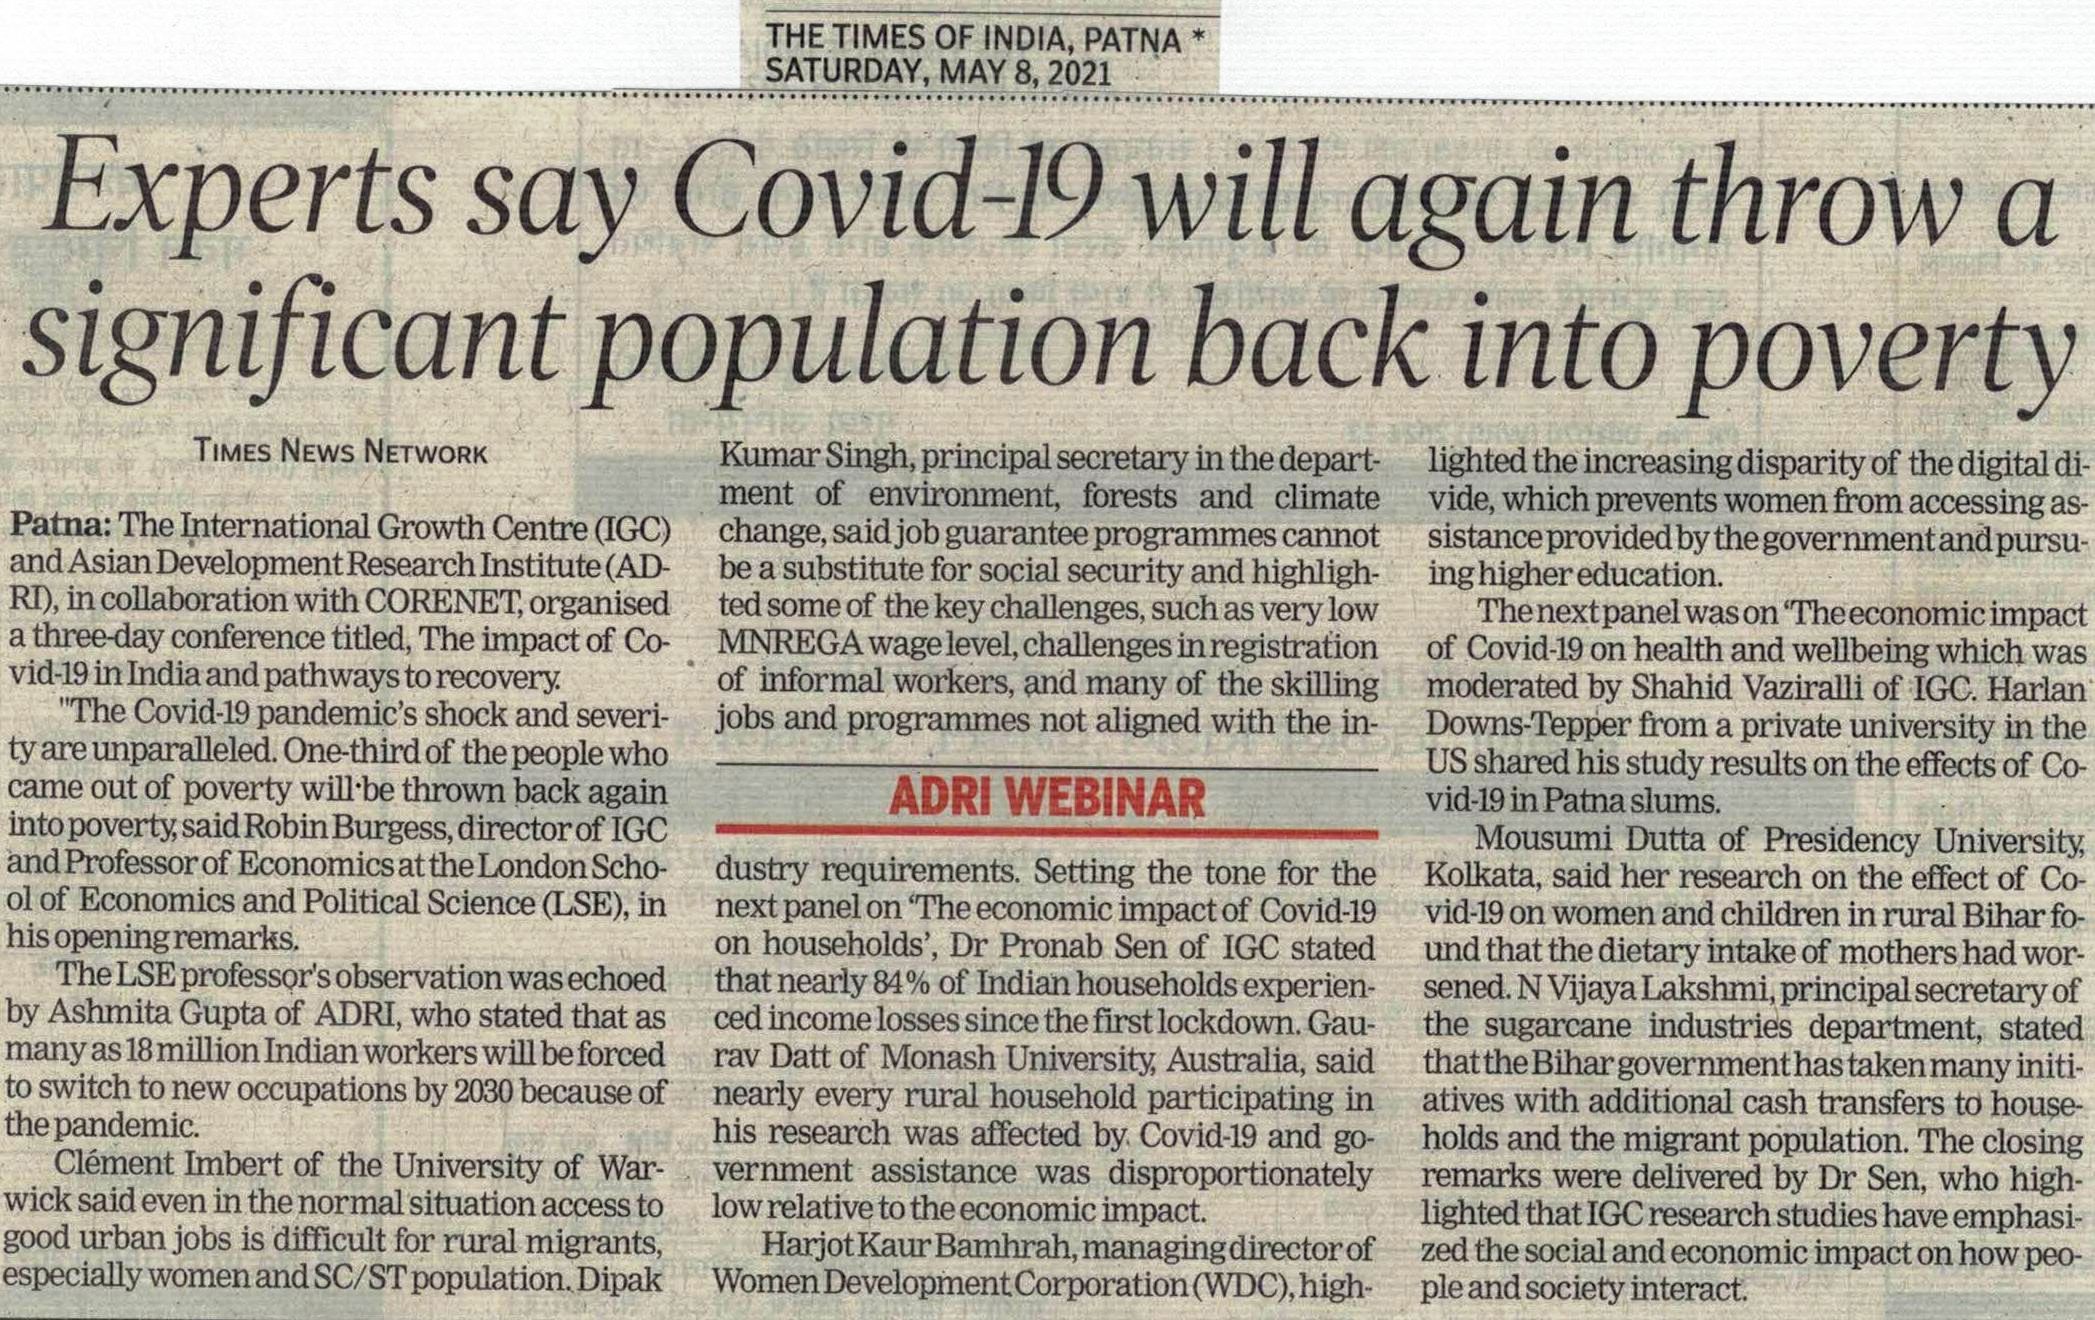 case study on covid 19 patients in india